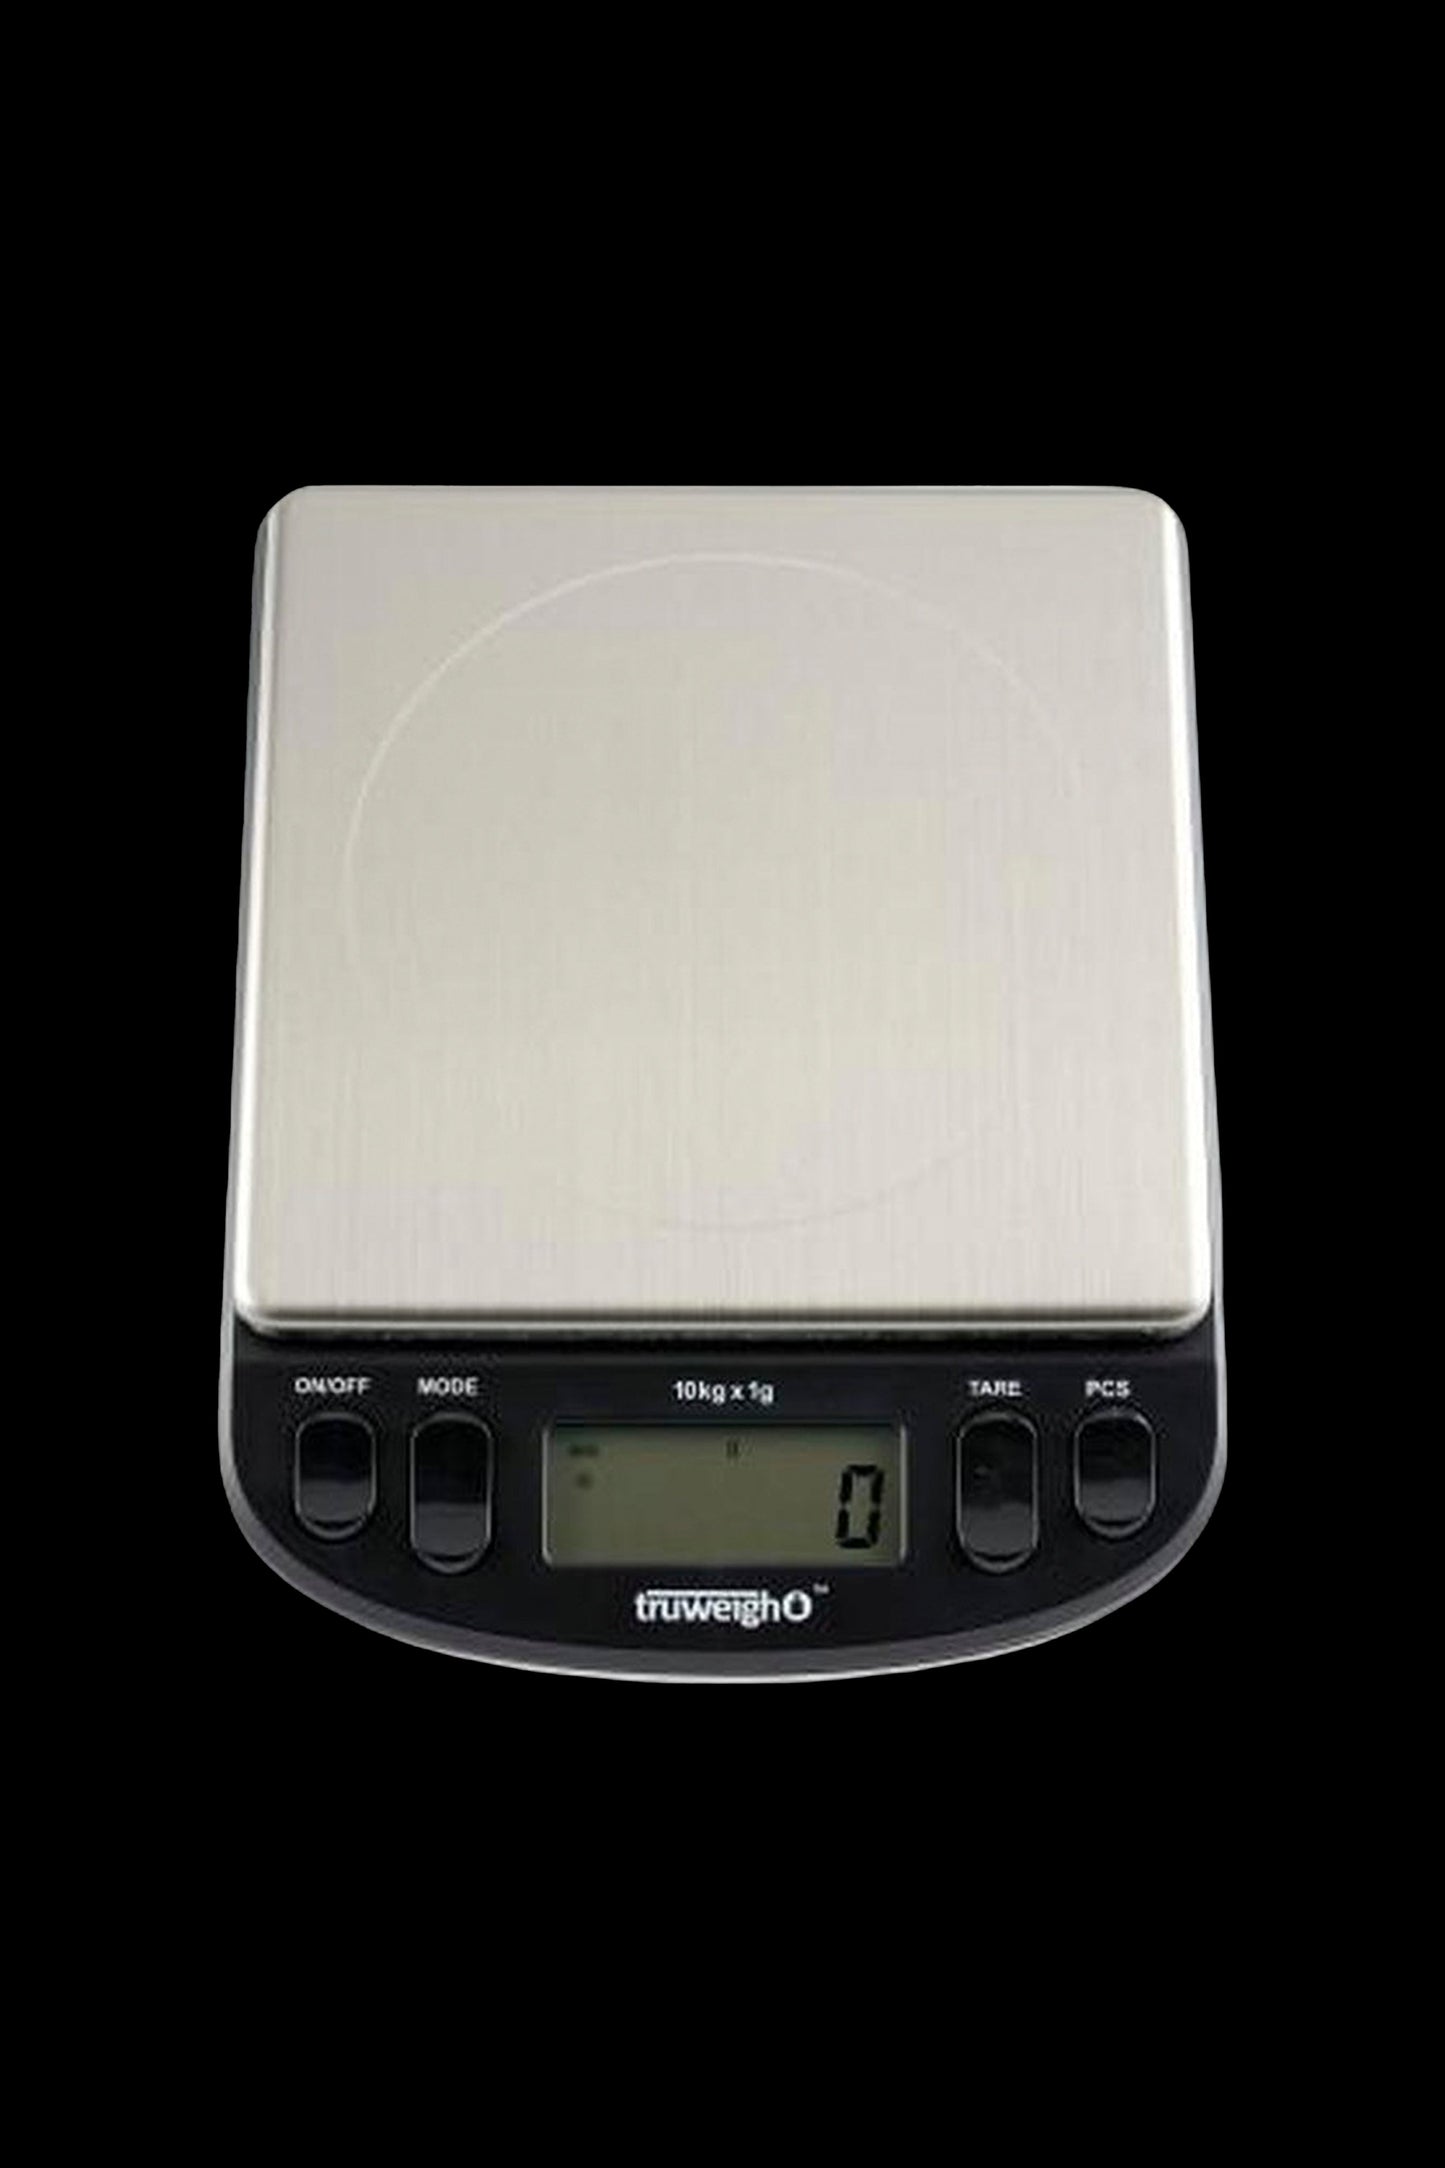 Truweigh Intrepid Series Black Compact Bench Scale with Bowl Best Sales Price - Accessories